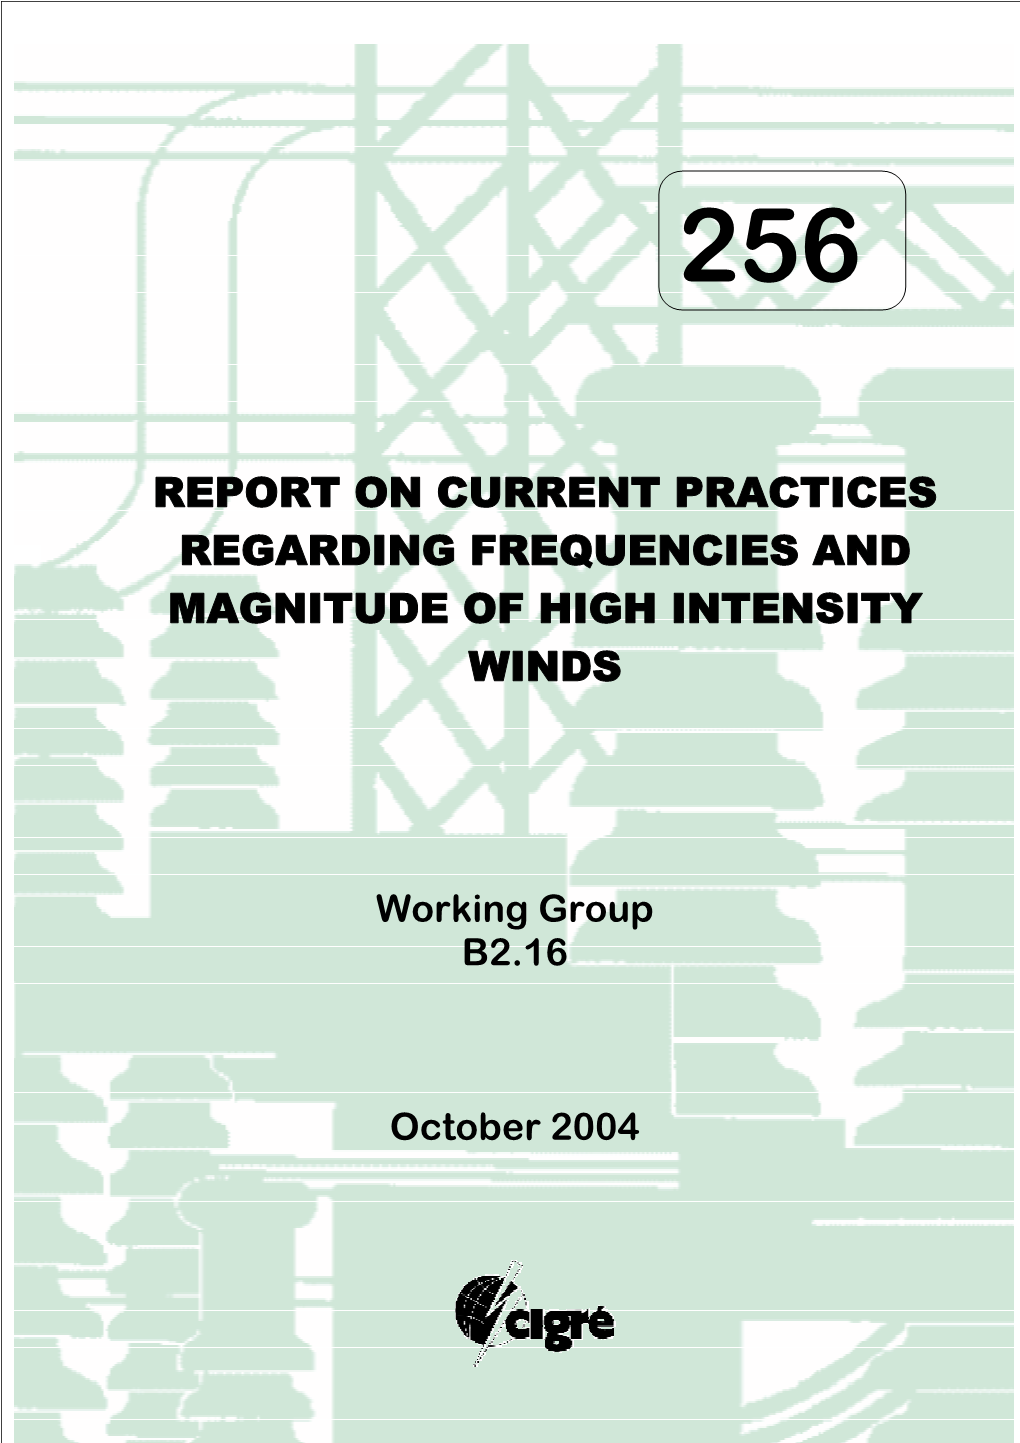 Report on Current Practices Regarding Frequencies and Magnitude of High Intensity Winds